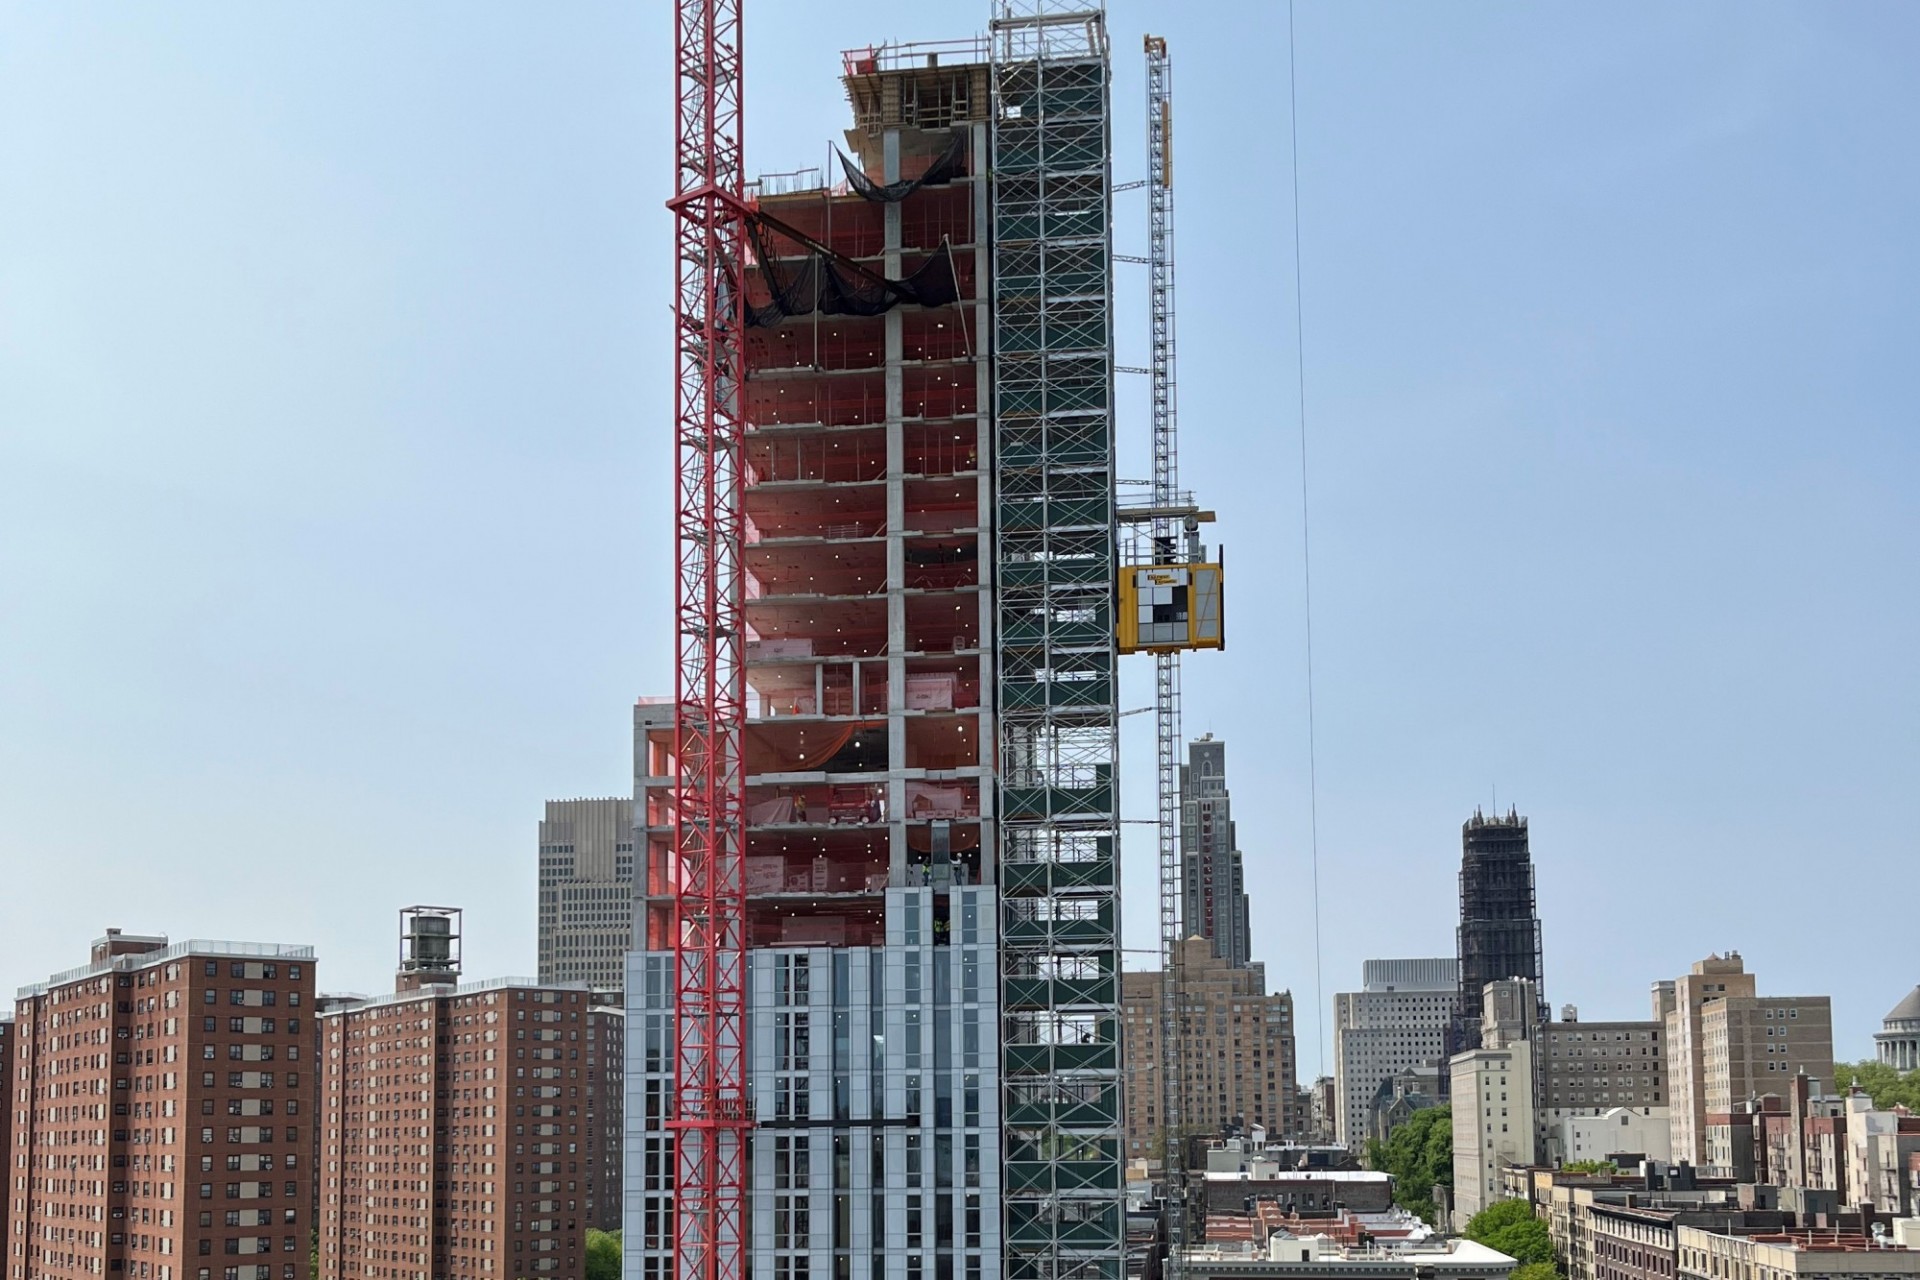 A view of the 600 W. 125th Street construction site which is 29 floors high, and has some facade panels installed around it. 